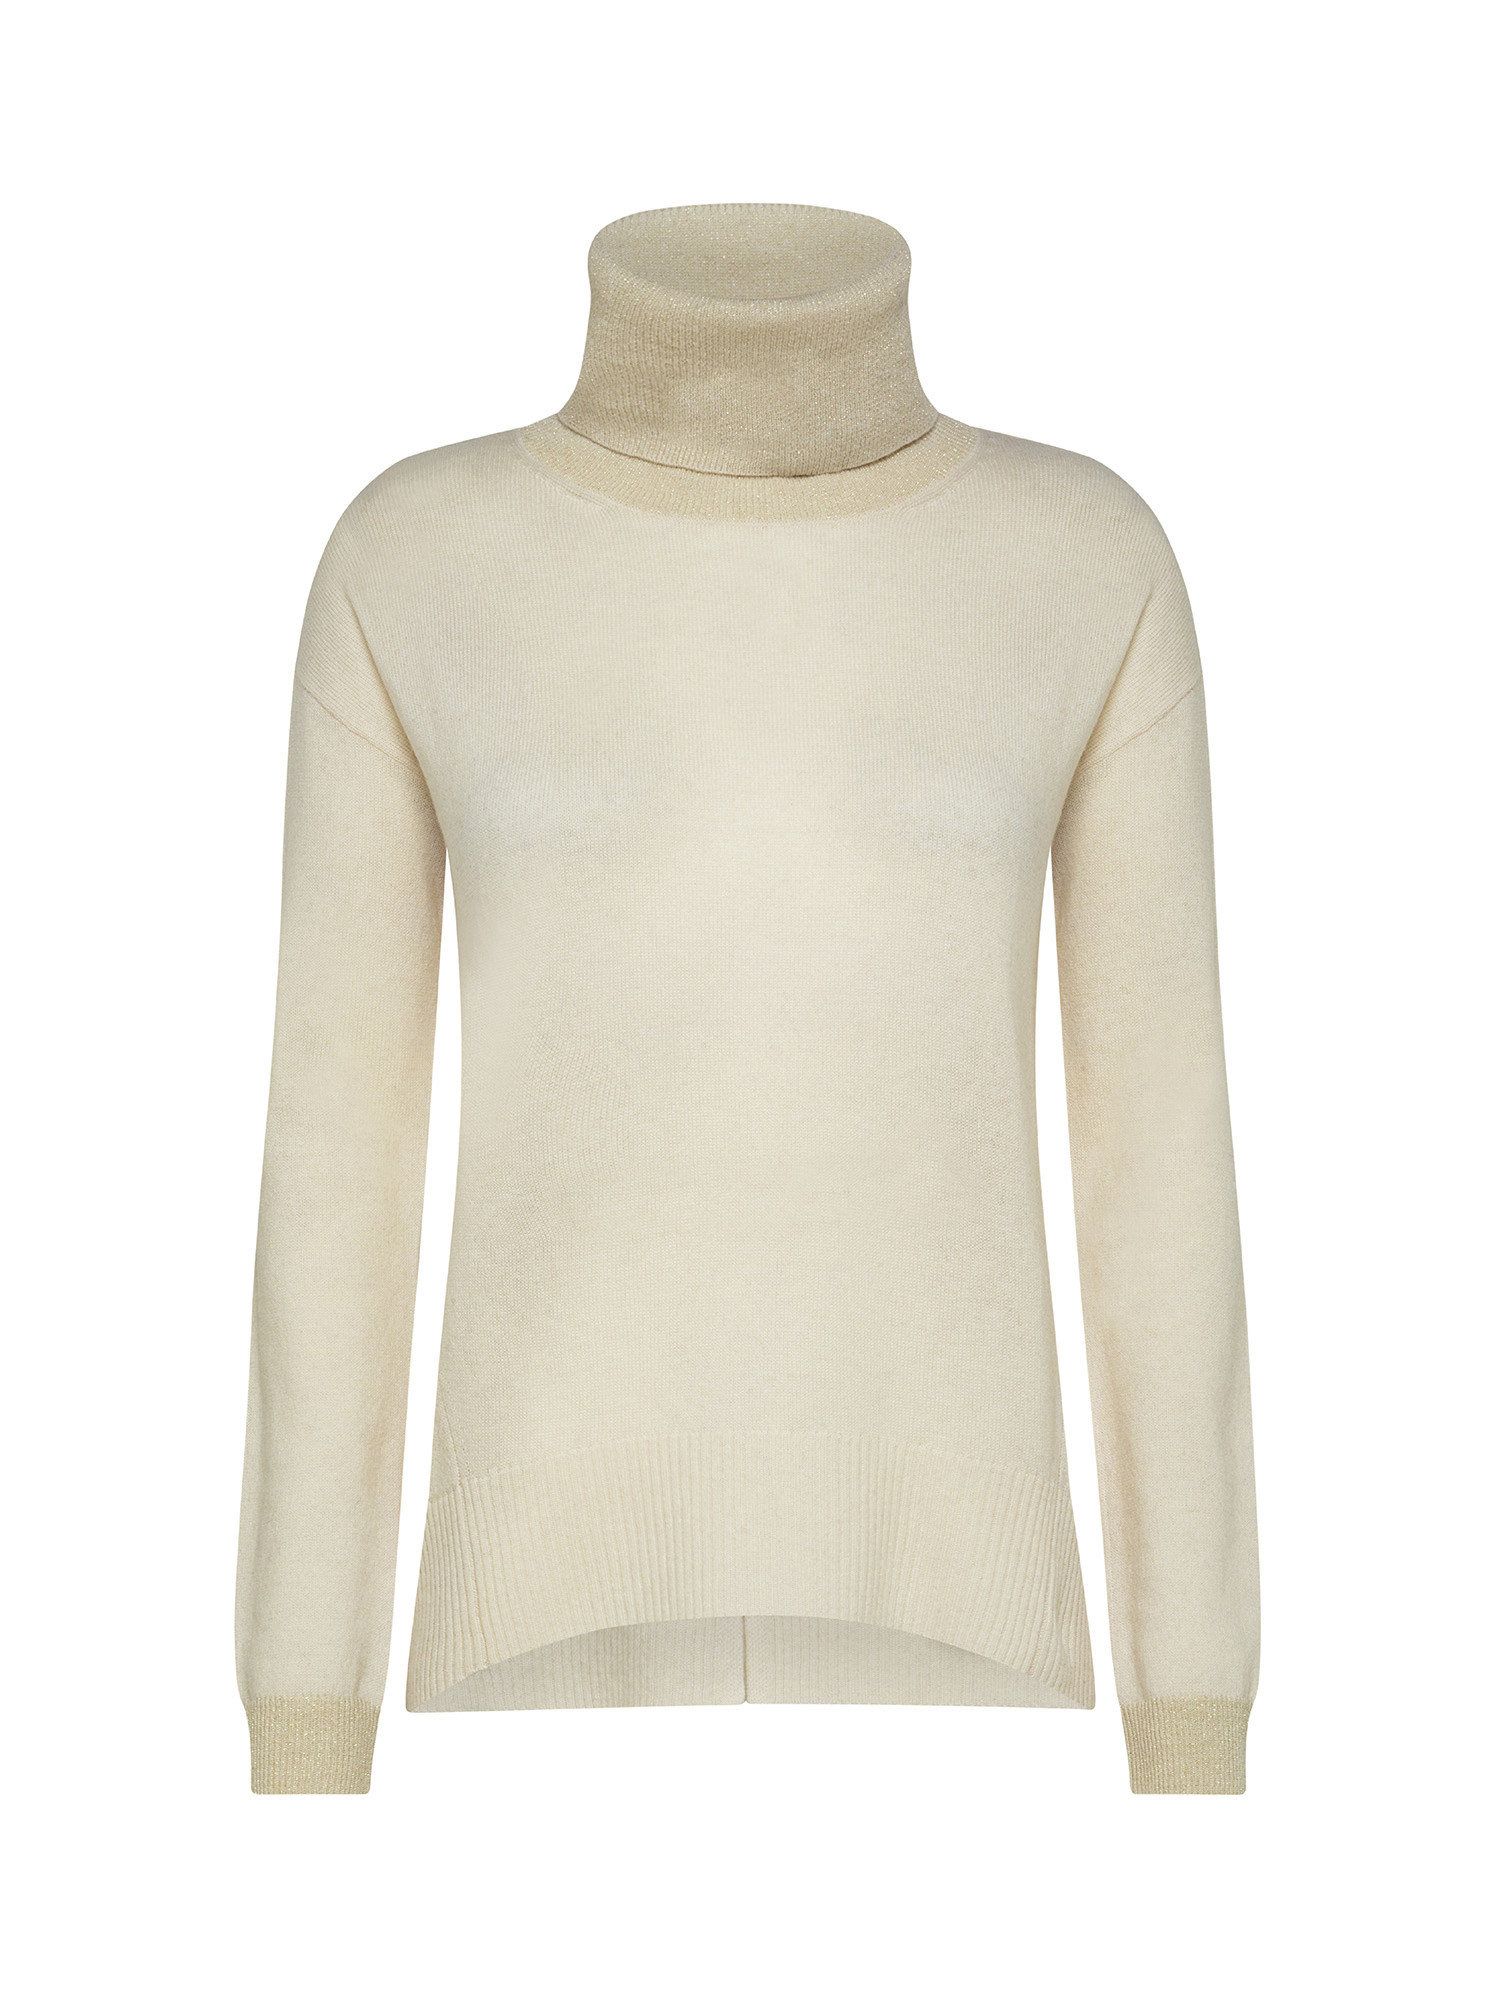 Koan - Wool and cashmere turtleneck pullover, White, large image number 0